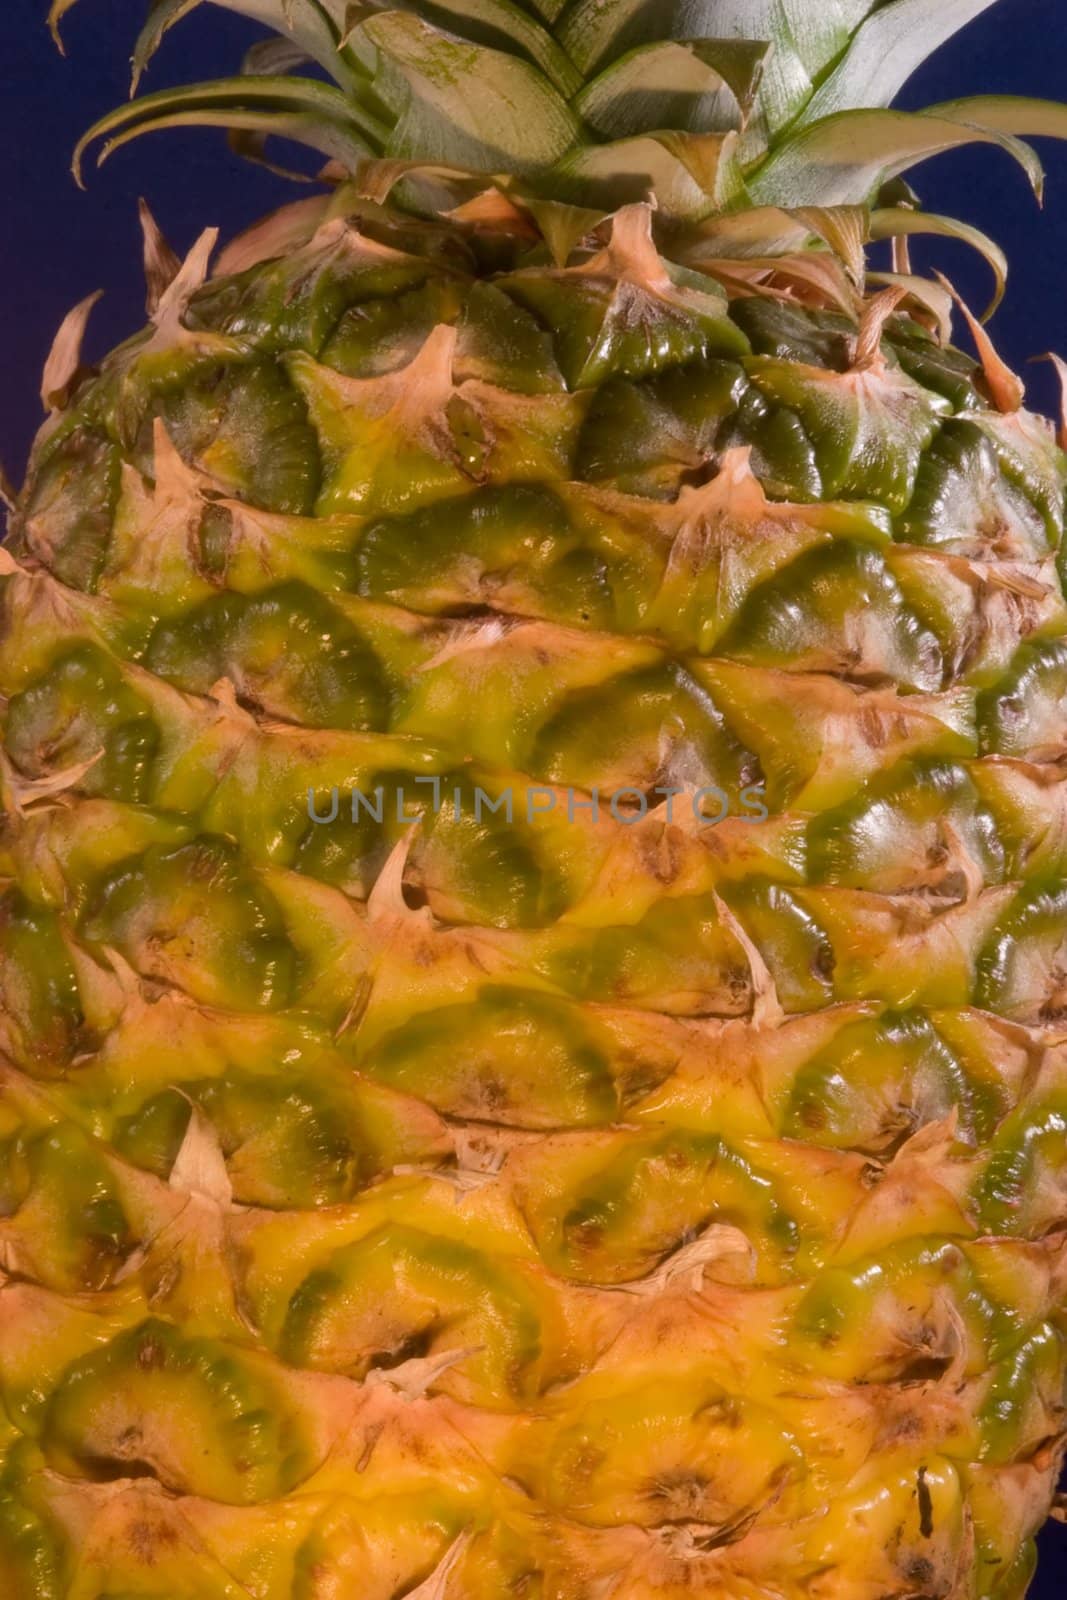 The pineapple (Ananas comosus) is a tropical plant and fruit (multiple), native to Uruguay, Brazil, and Paraguay.